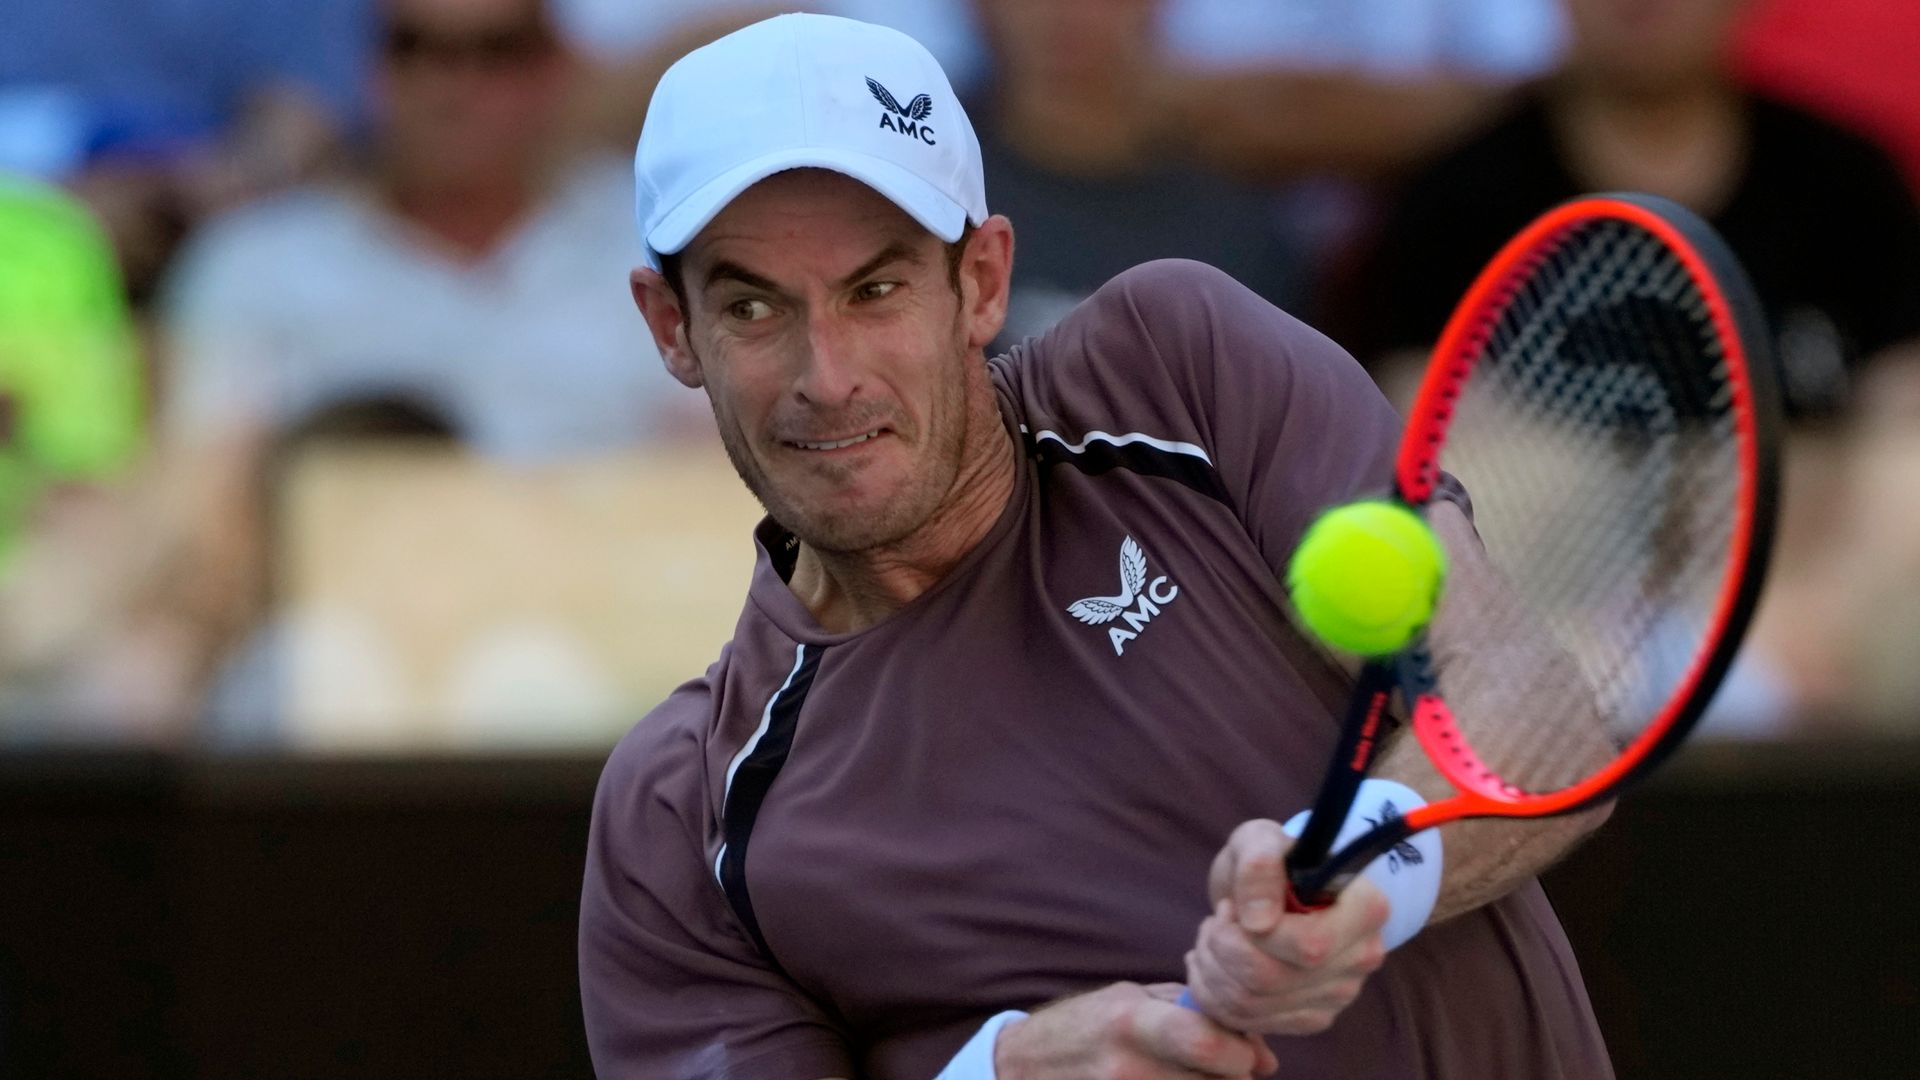 Australian Open LIVE! Murray falls two sets down against Etcheverry